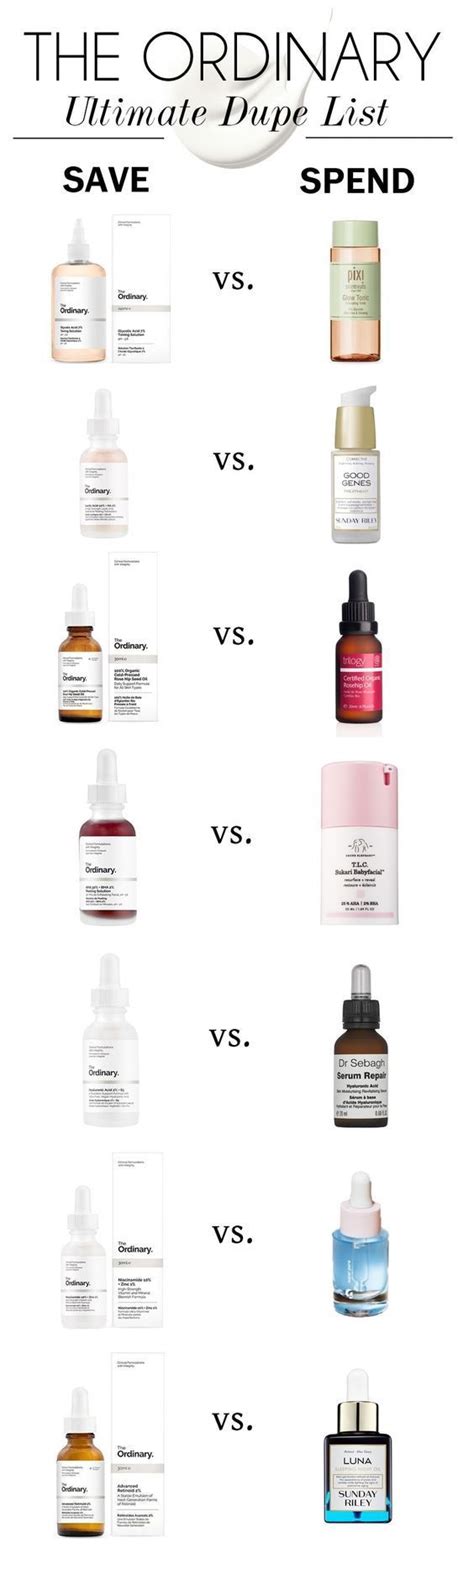 The Ordinary Ultimate Dupe List With Images Skincare Dupes Makeup